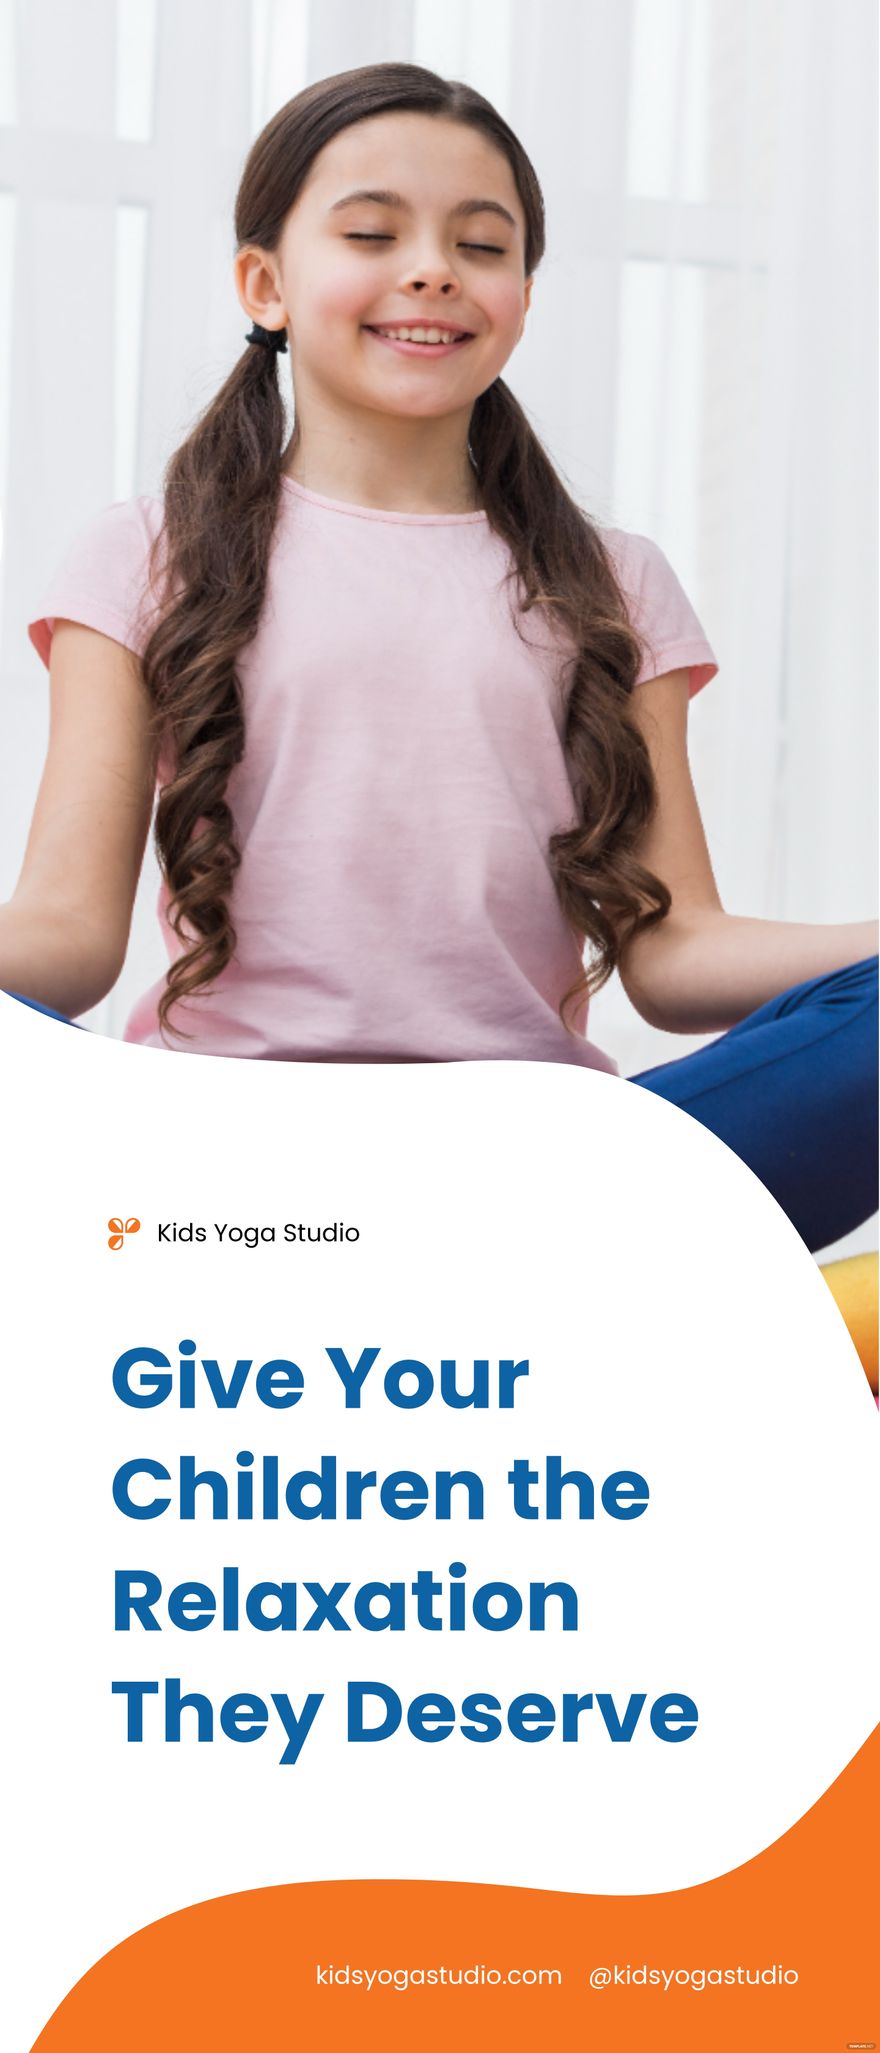 Kids Yoga Roll Up Banner Template